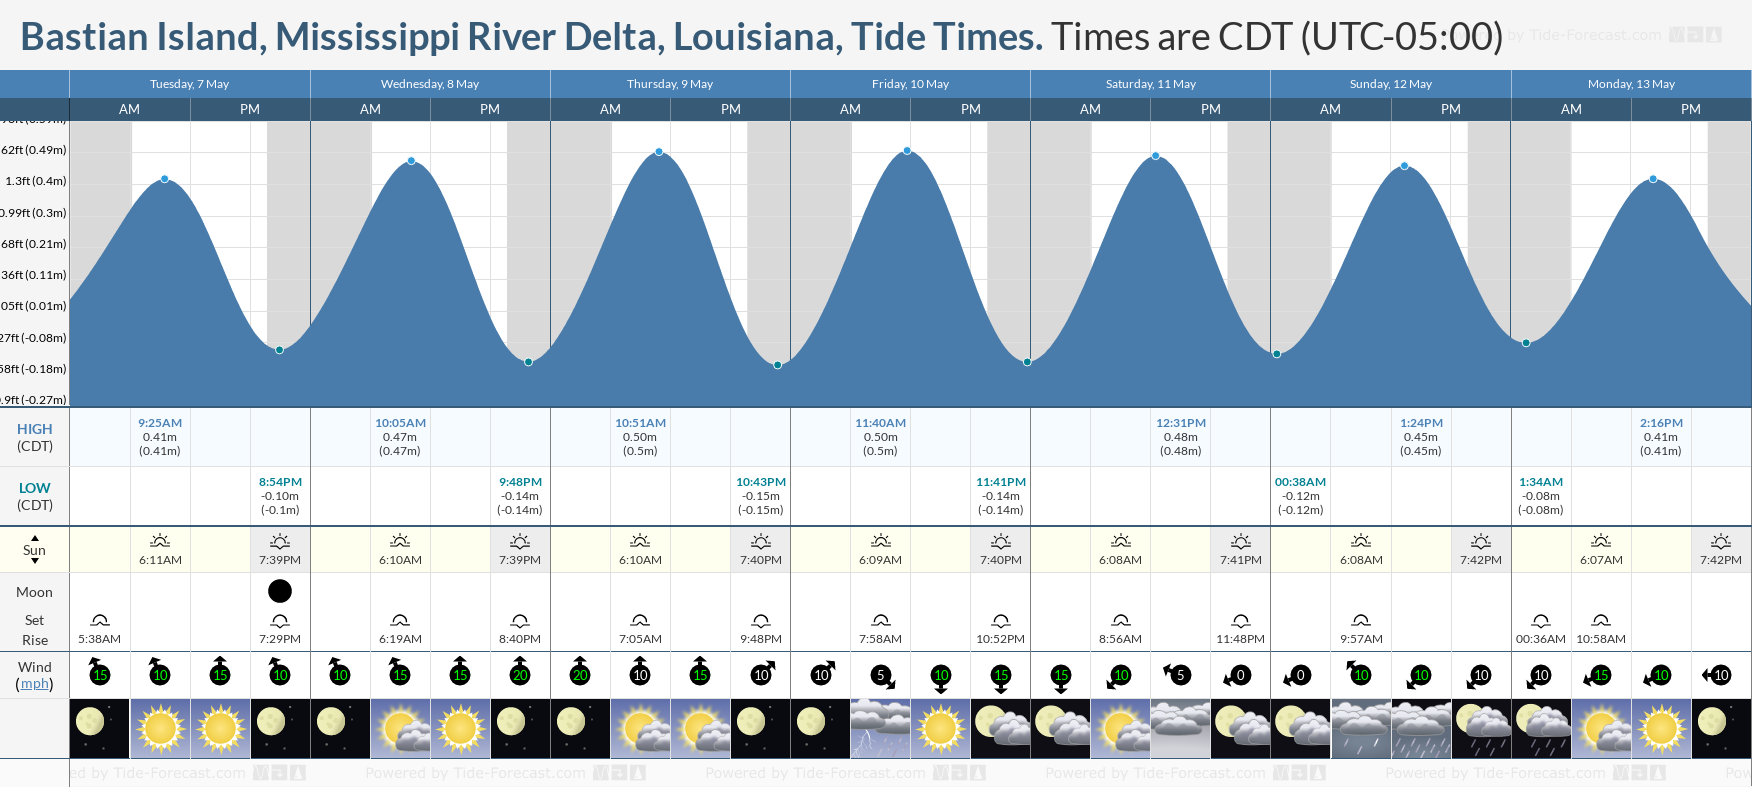 Bastian Island, Mississippi River Delta, Louisiana Tide Chart including high and low tide times for the next 7 days